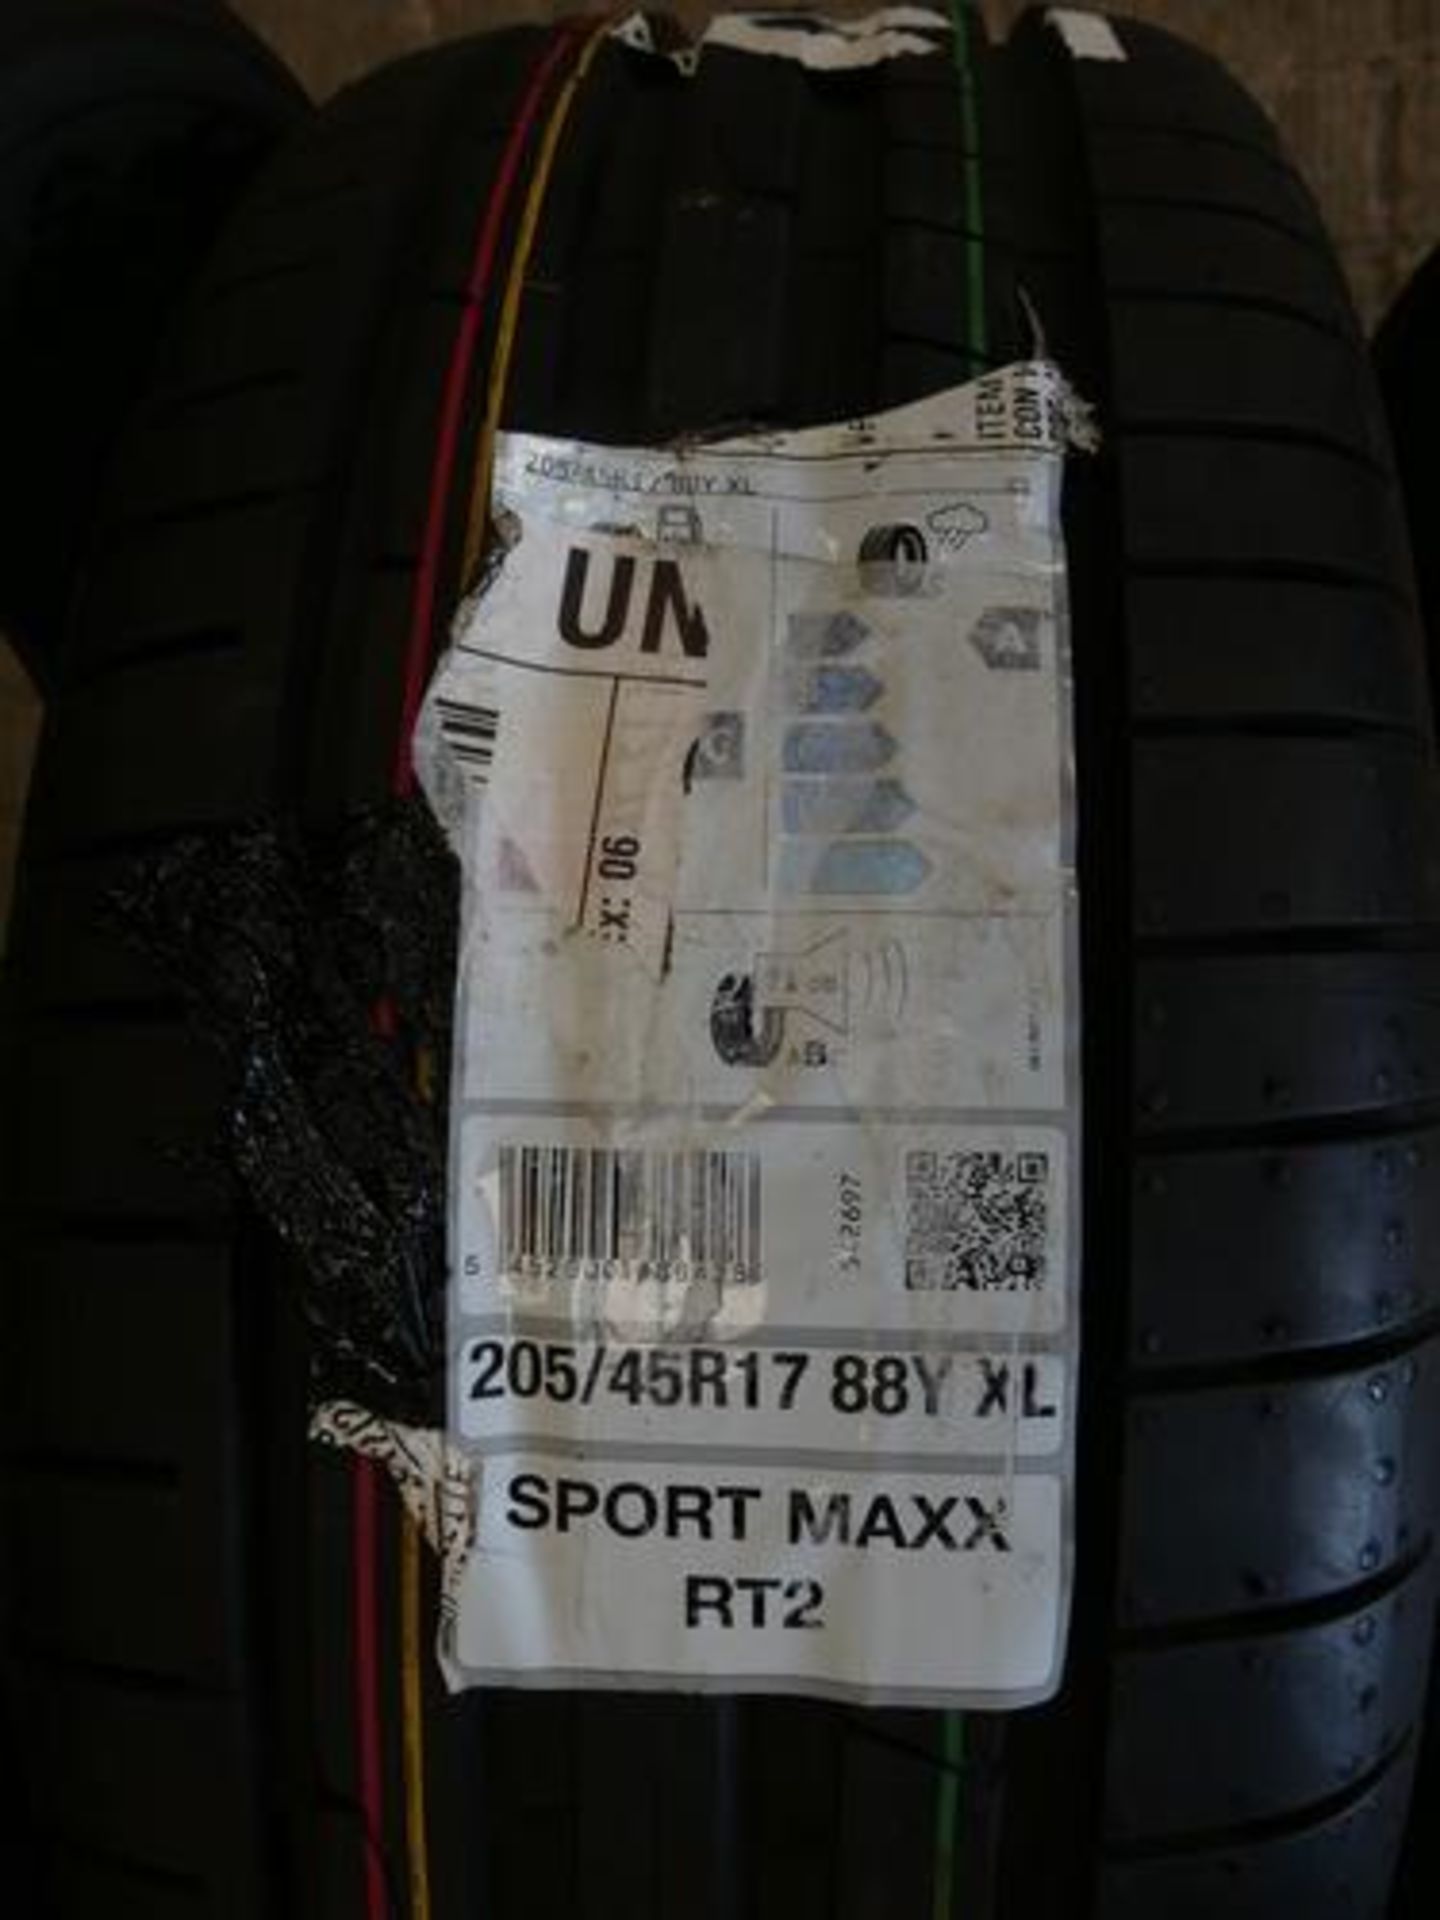 1 x Dunlop Sport Max RT2 tyre, size 205/45R17 88Y XL - New with label (pallet 3)